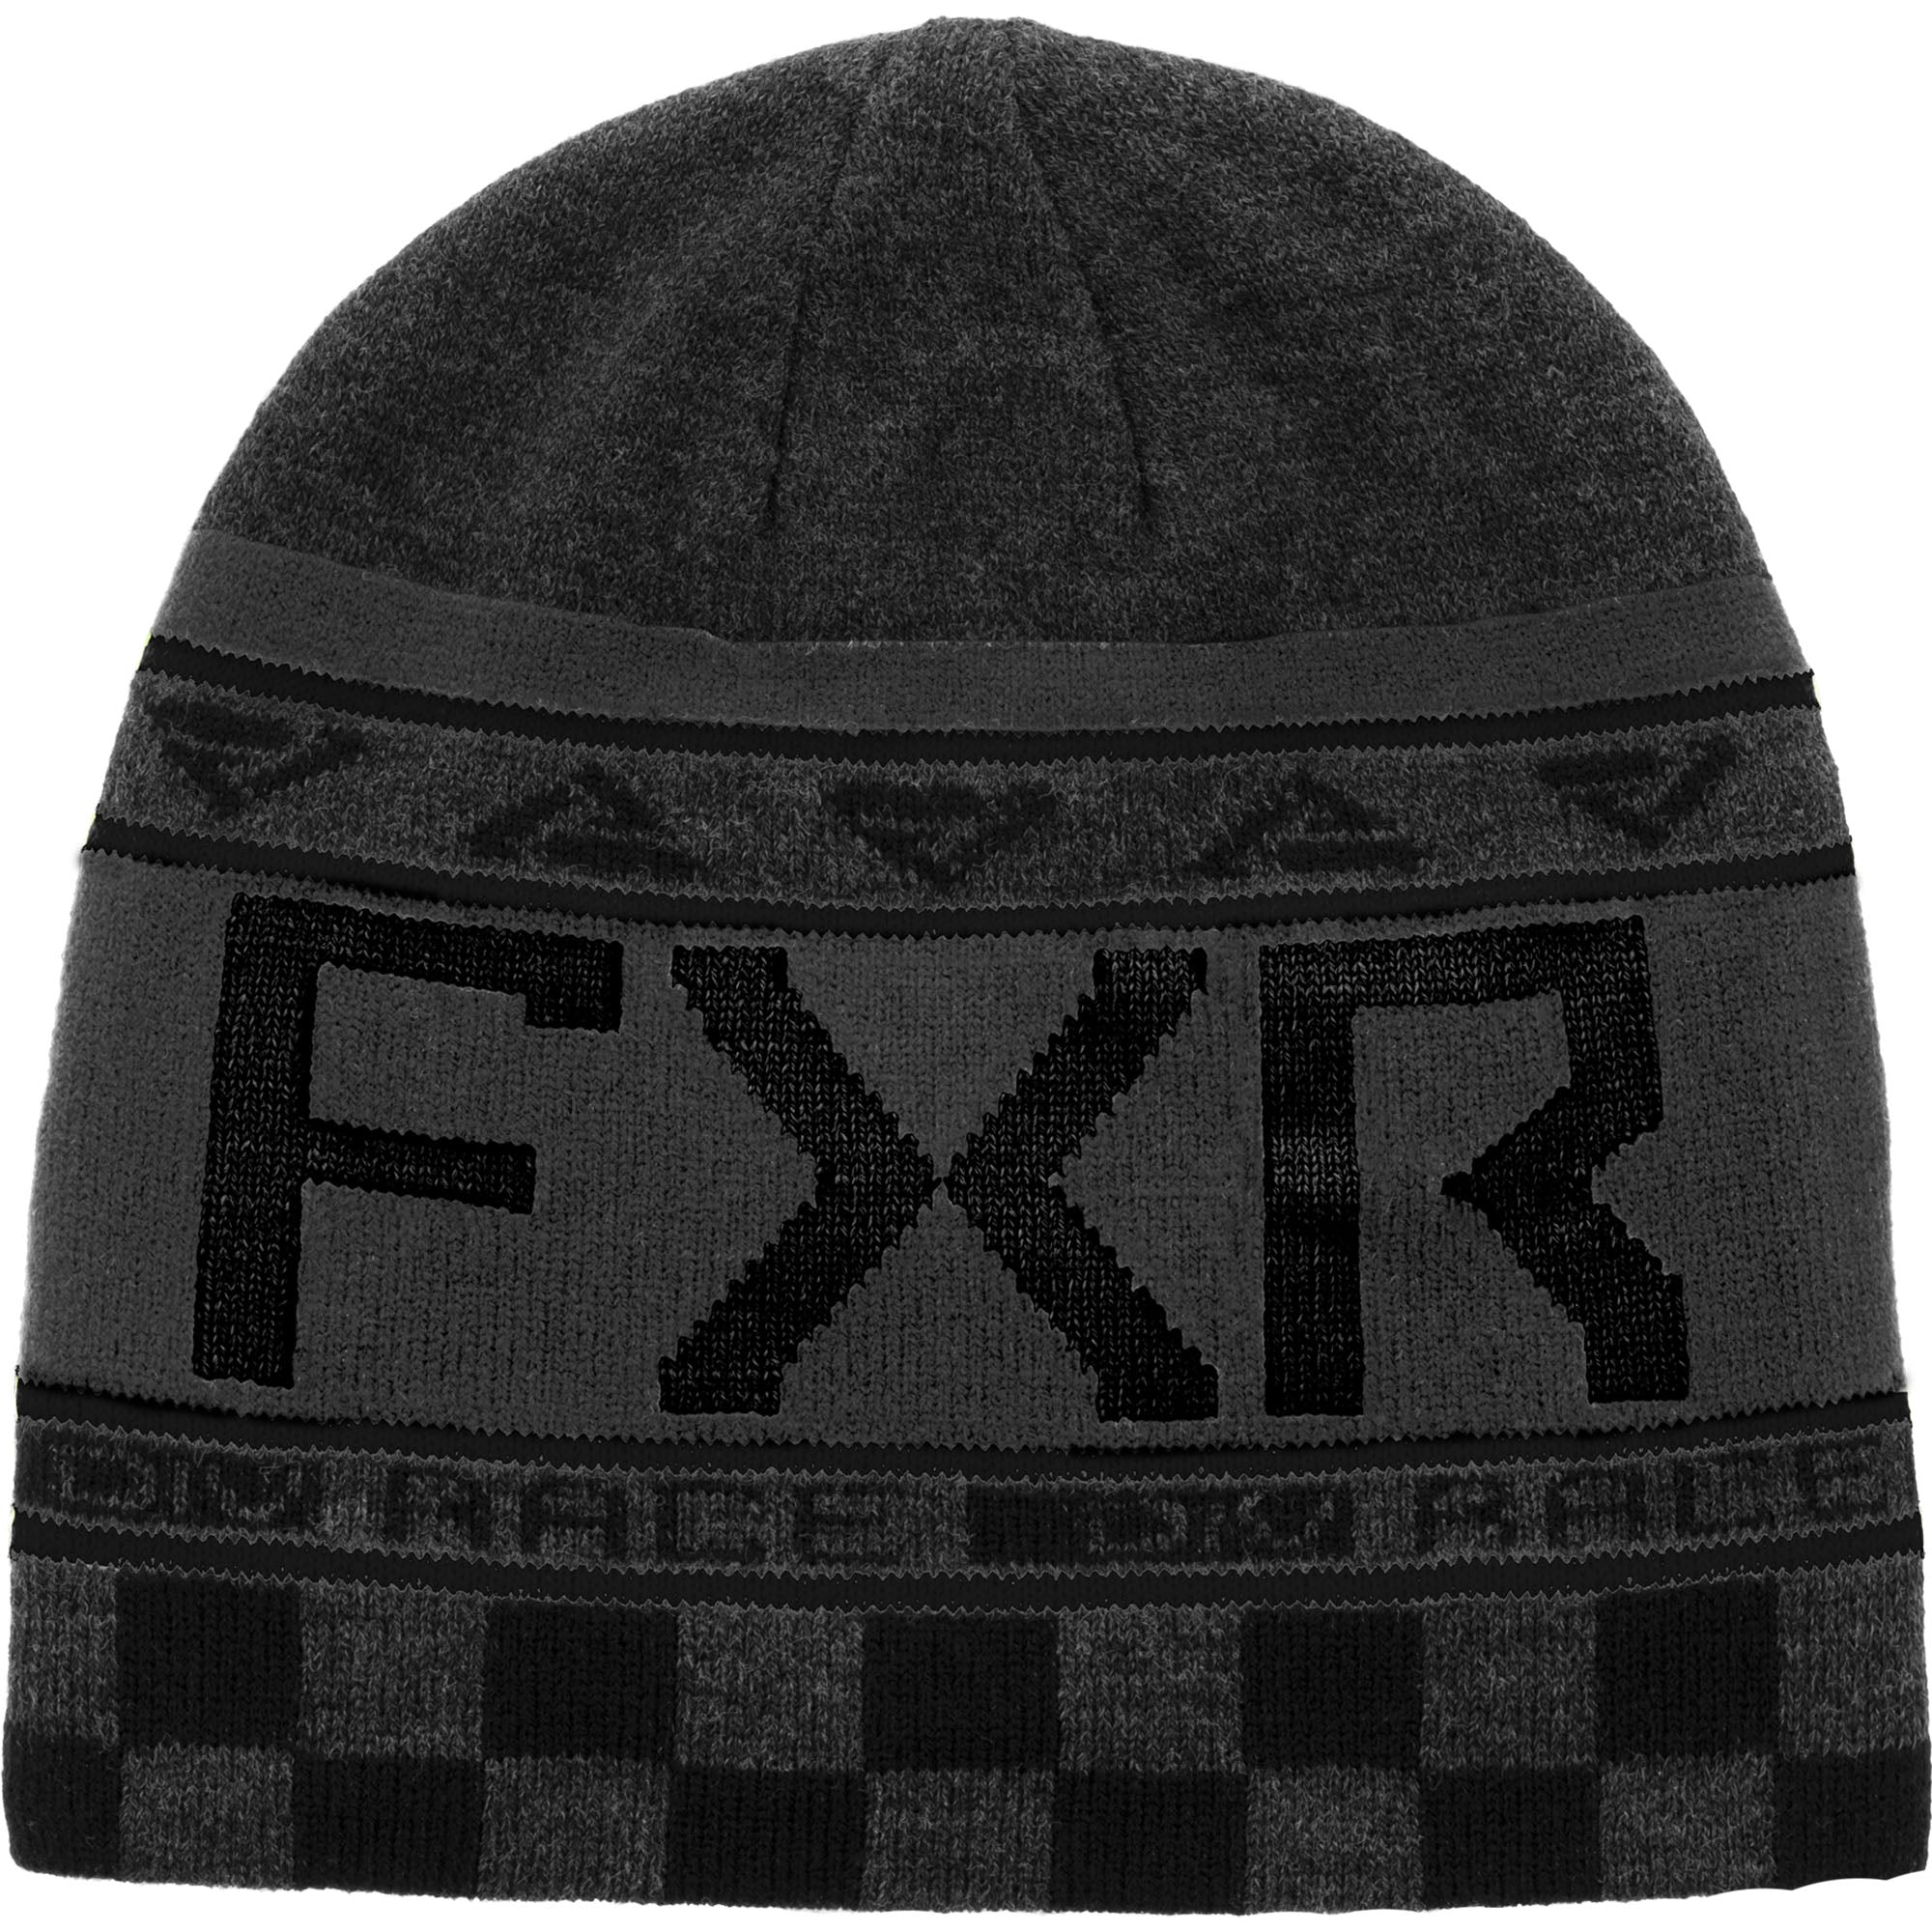 FXR  Youth Race Division Beanie Classic Skull Fit Soft Acrylic Jacquard Knit